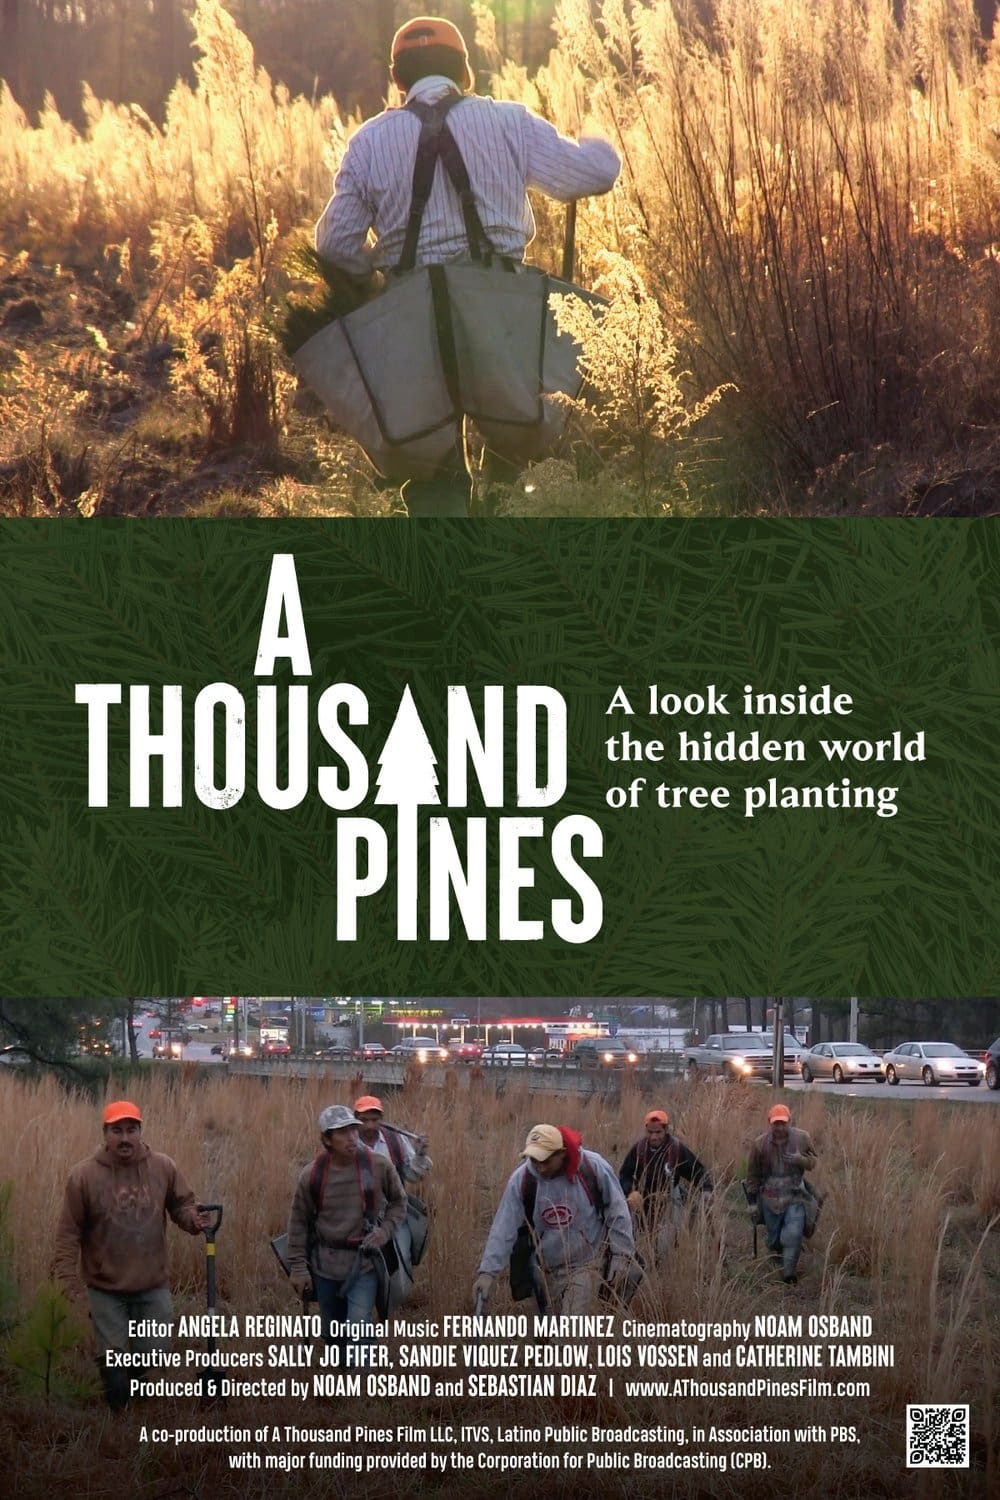 A Thousand Pines